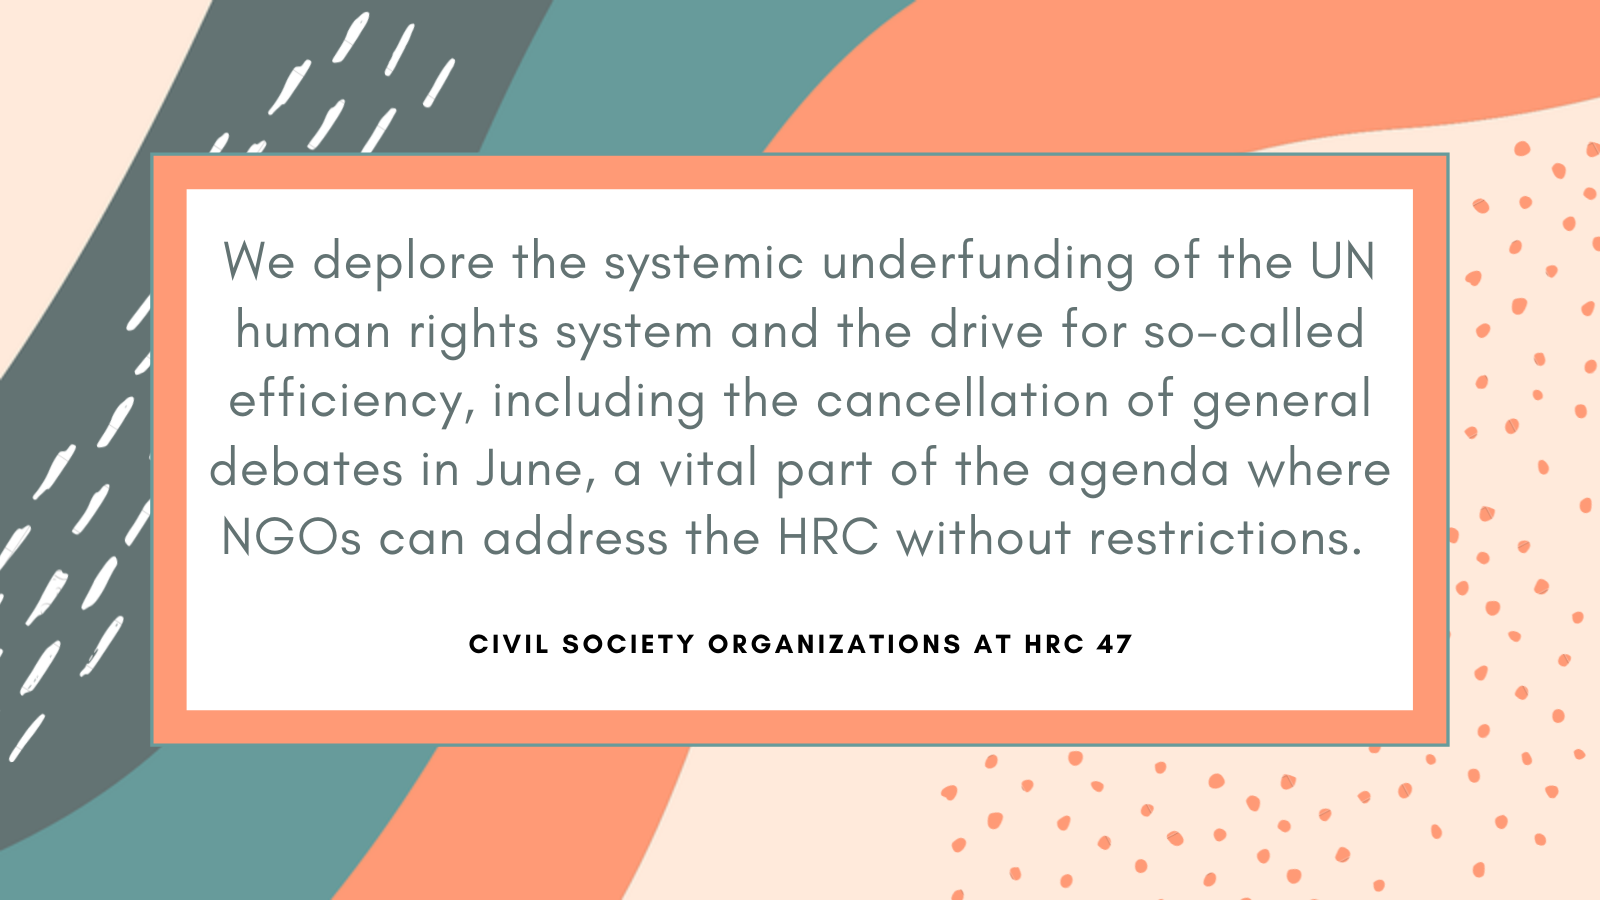 We deplore the systemic underfunding of the UN human rights system and the drive for so called efficiency, including the cancellation of general debates in June, a vital part of the agenda where NGOs can address the HRC without restrictions.